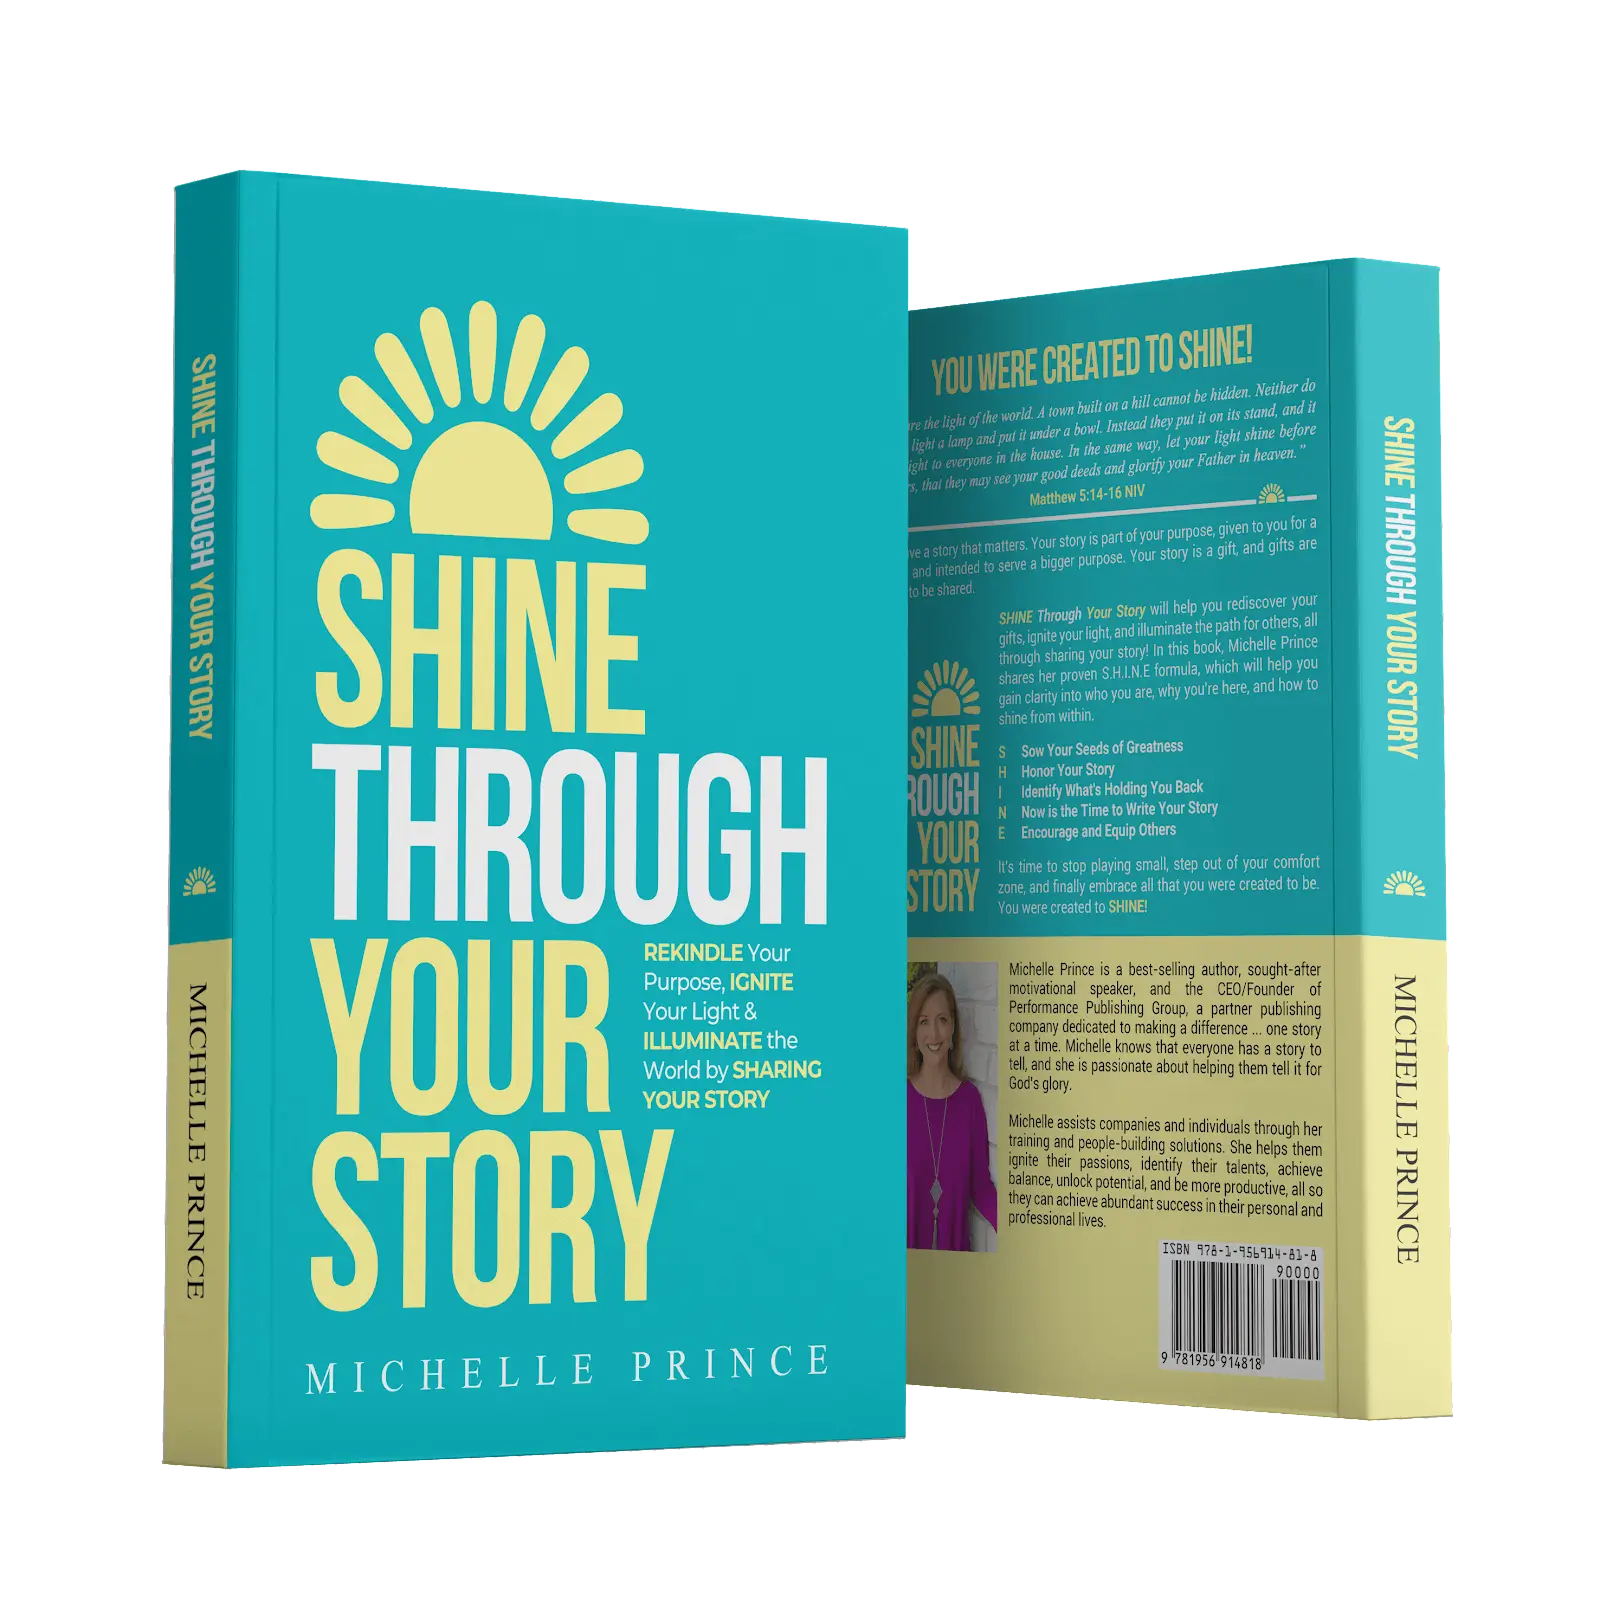 shine through your story book cover front and back